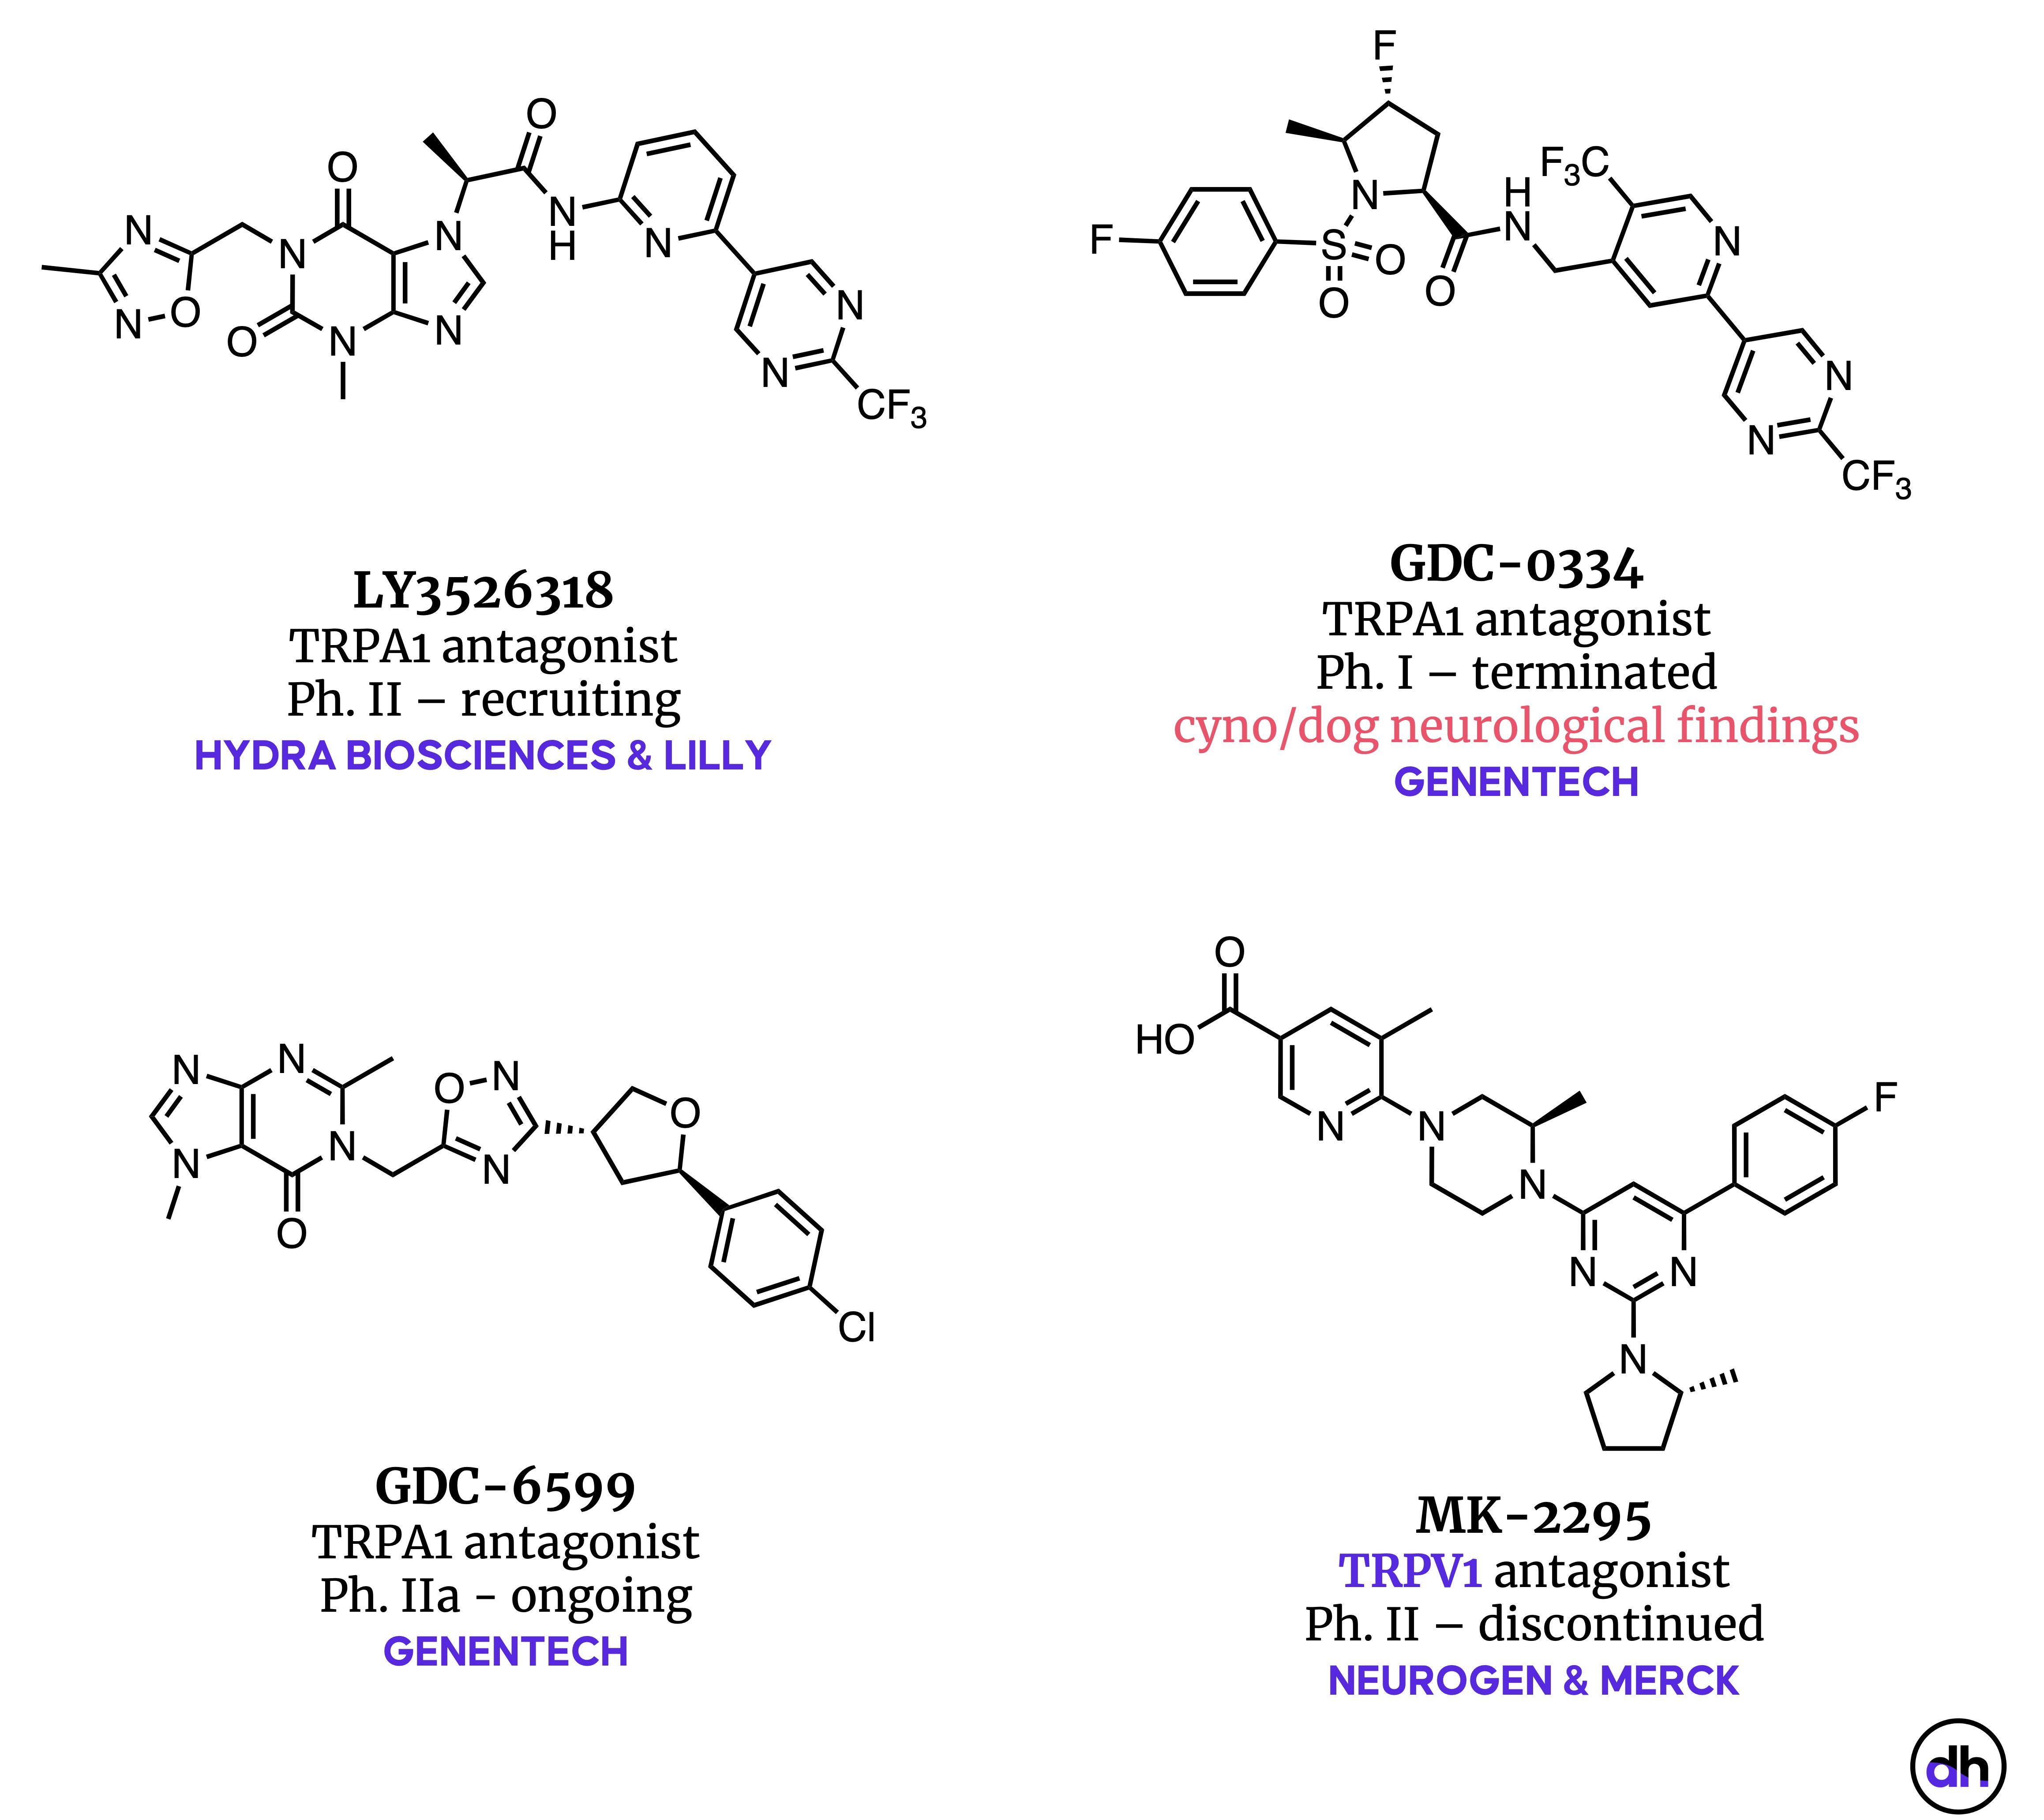 Figure 1. Examples of advanced TRPA1 antagonists